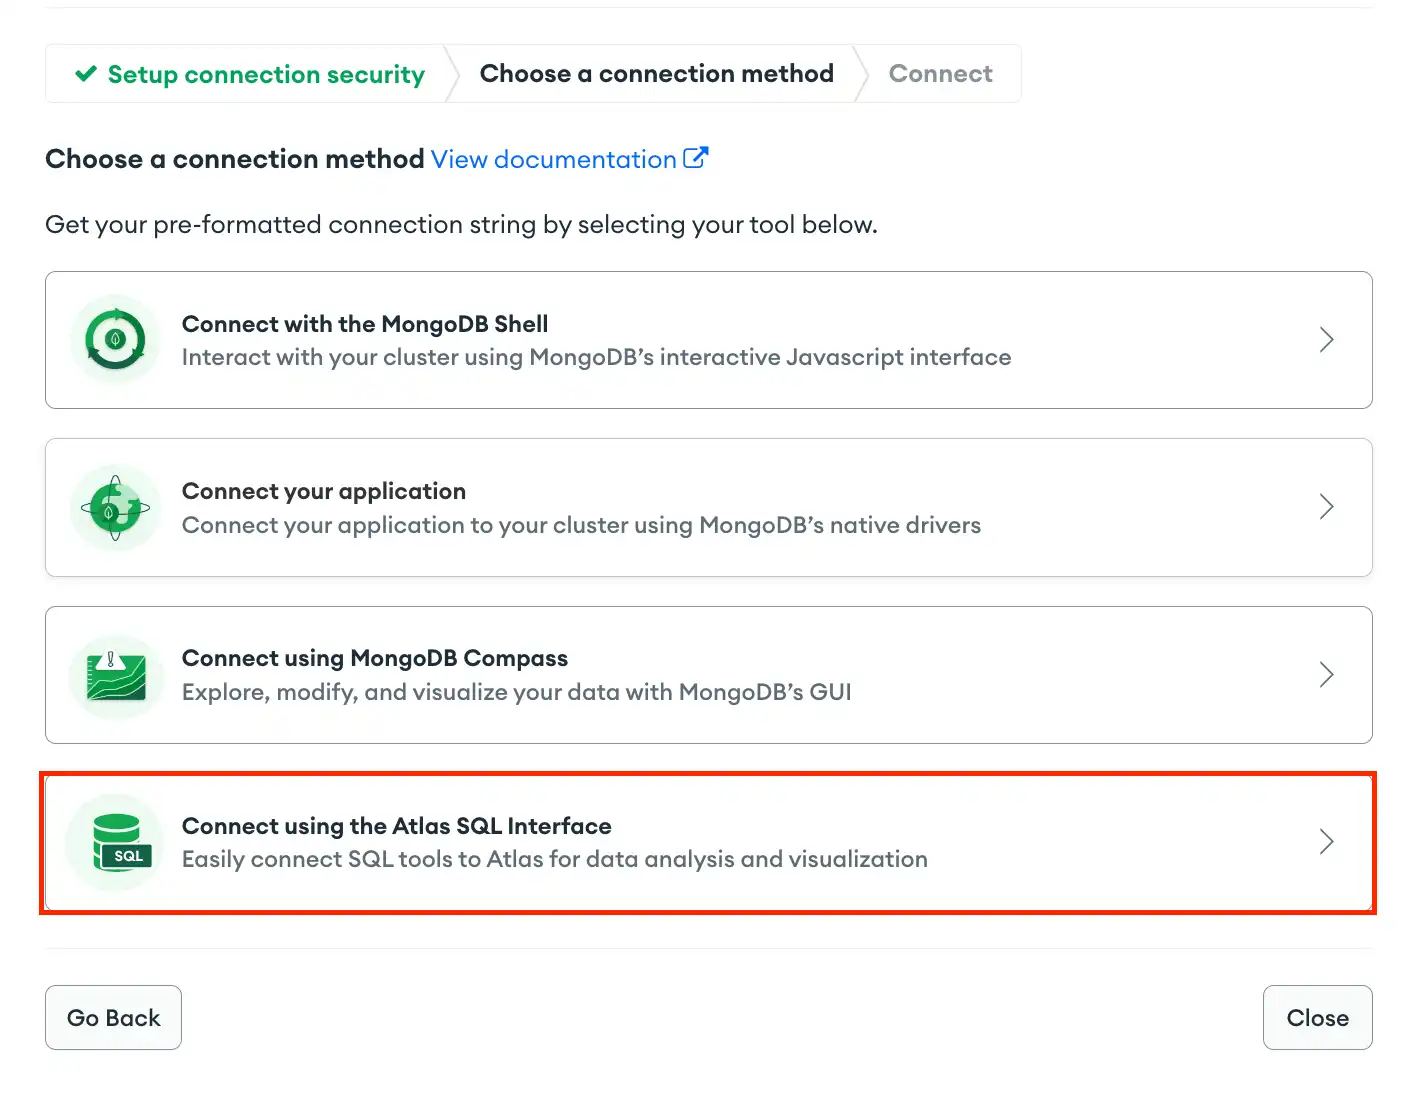 Screenshot of the Atlas connection modal with "Connect using the Atlas SQL Interface" option highlighted.